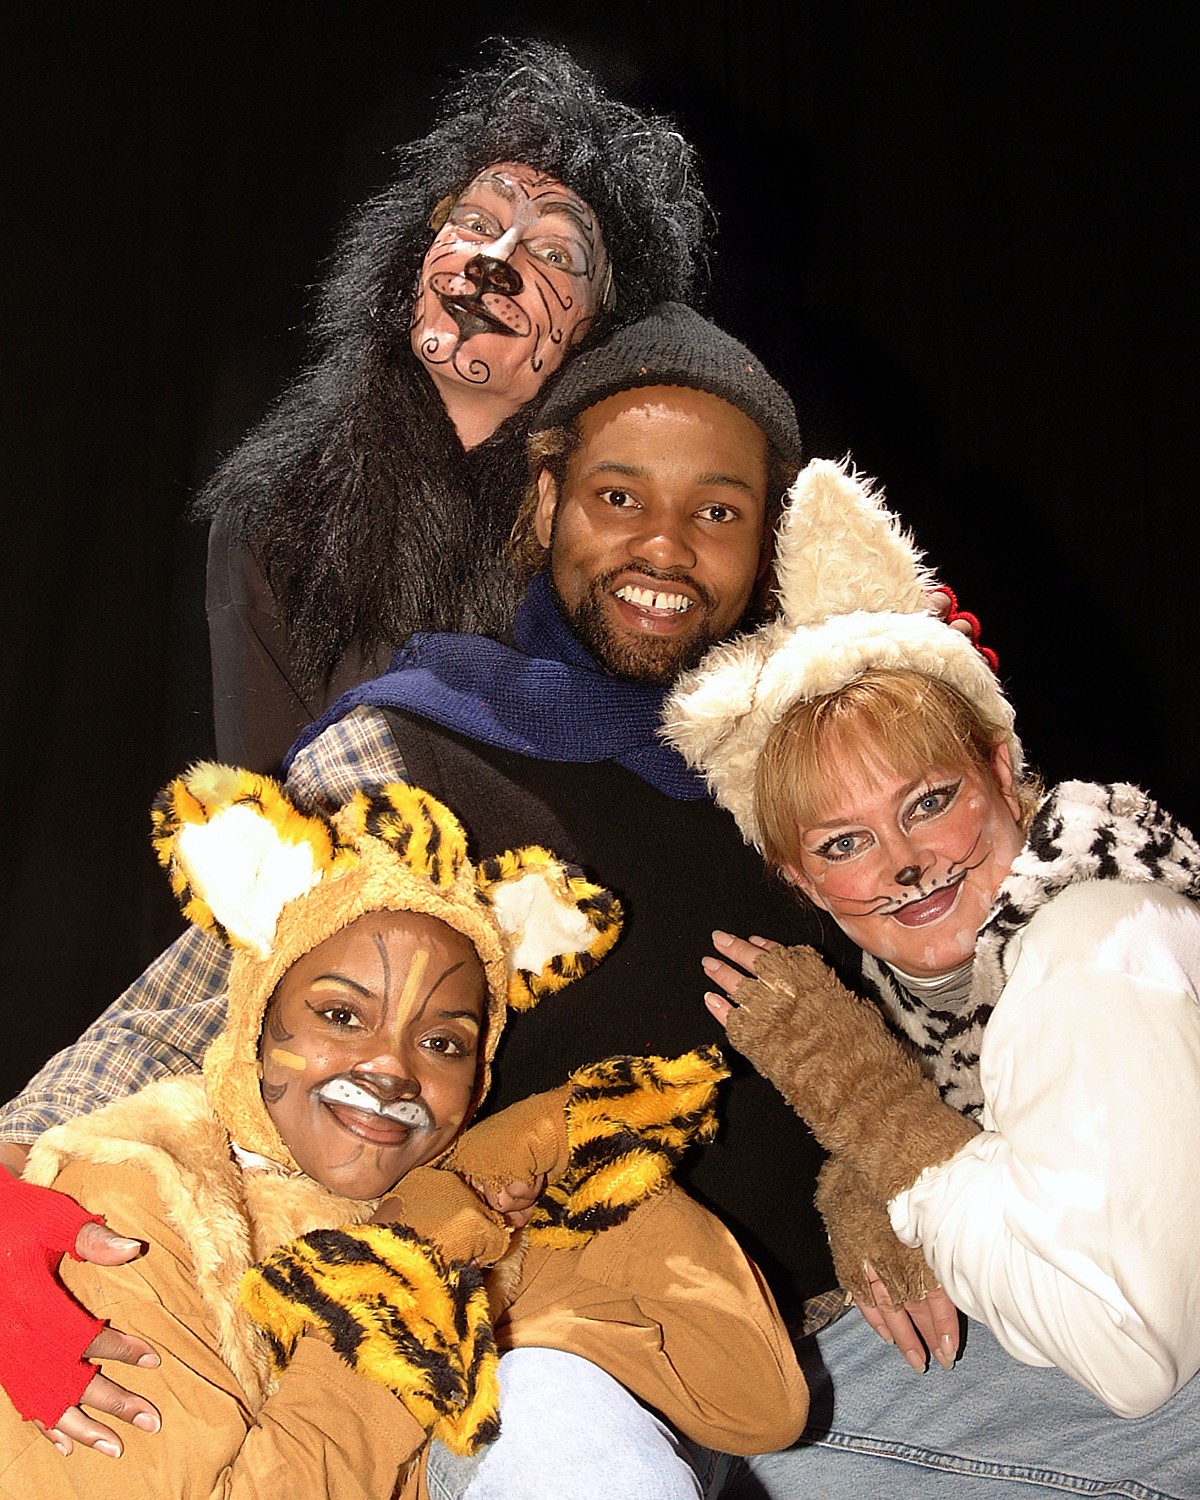 Photo for Three Wisecats on Broadway. Shows cast members in cat costumes.